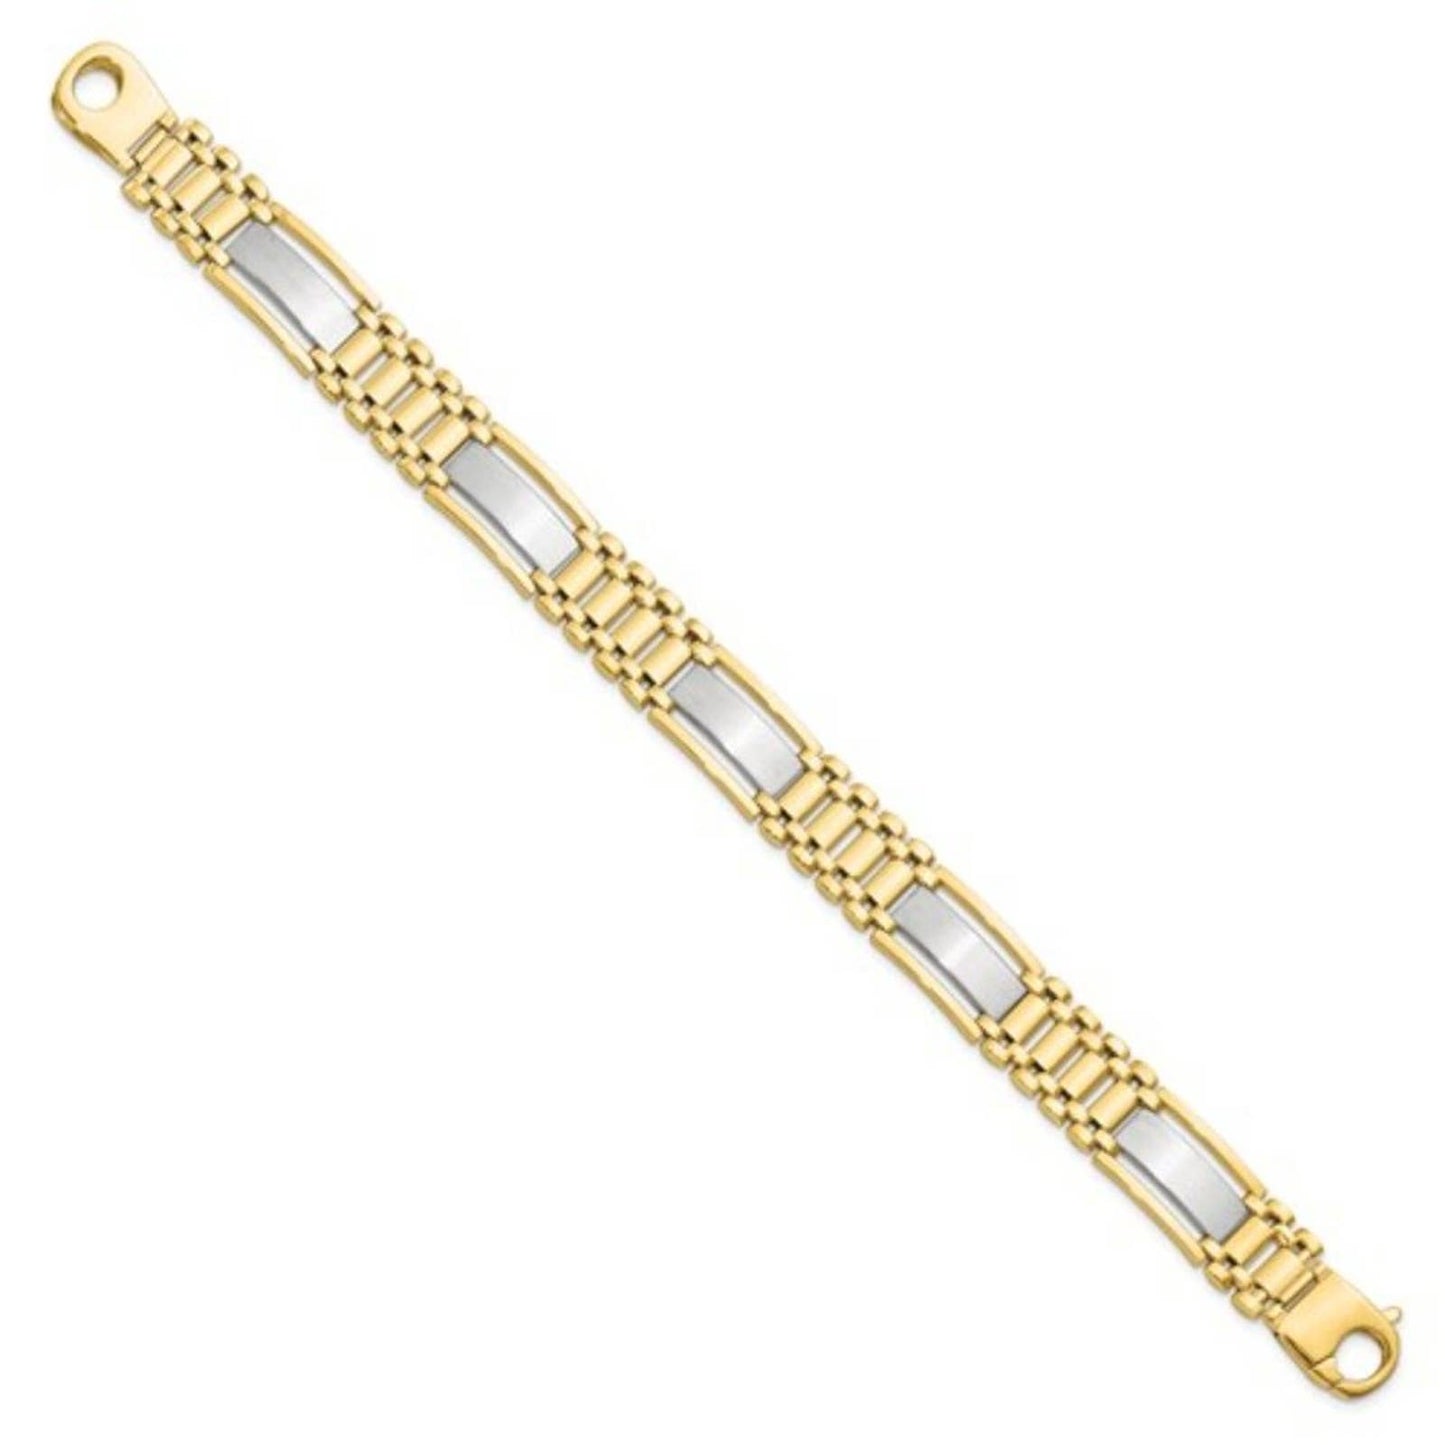 14K Two-tone Gold Polished and Satin Men's Bracelet, by Leslies